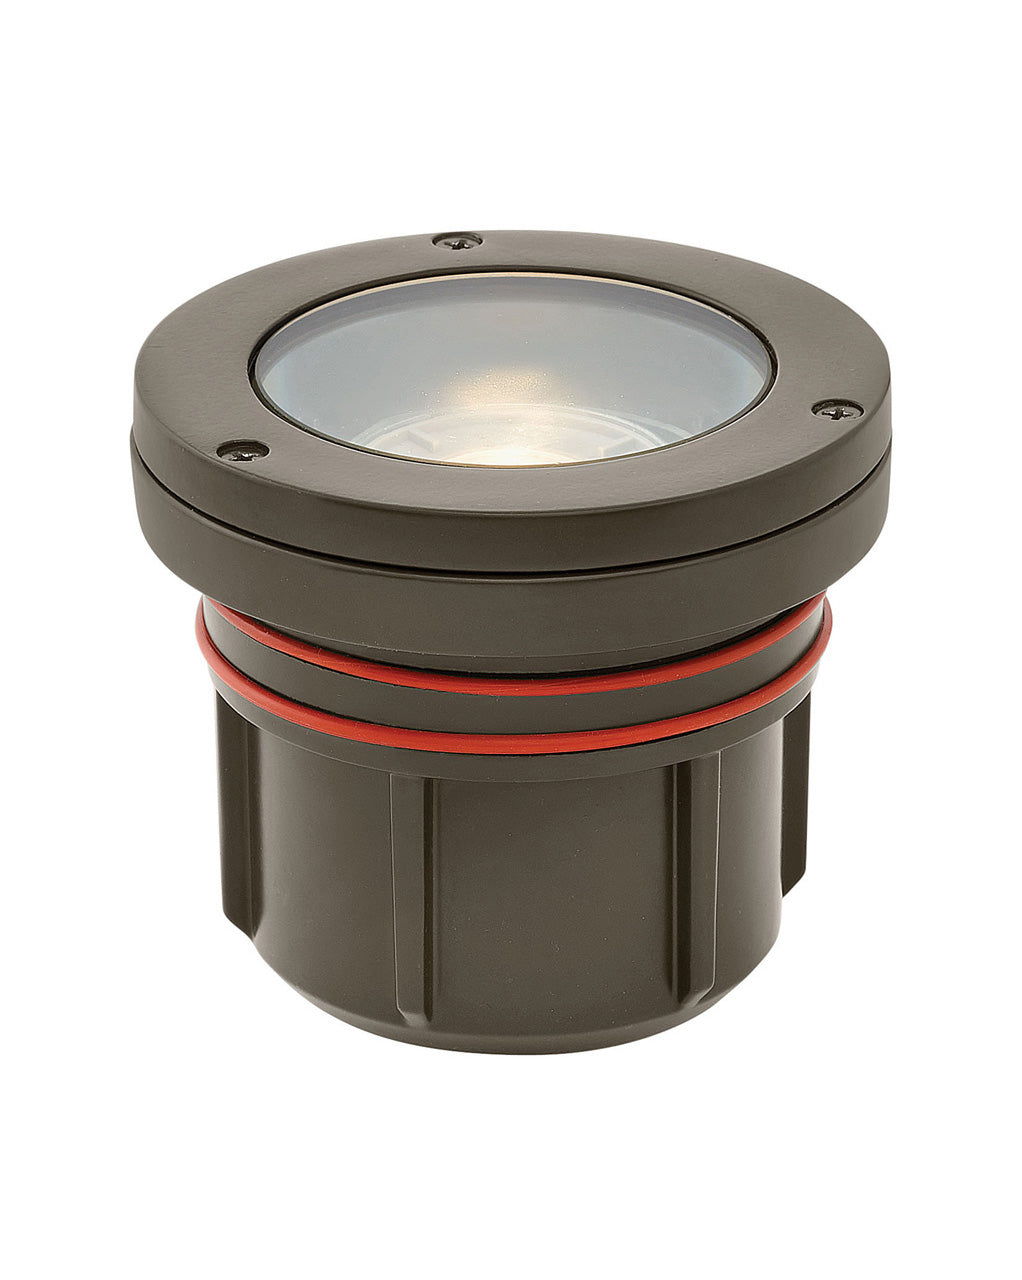 Hinkley  Flat Top Well Light Outdoor l Wall Hinkley   